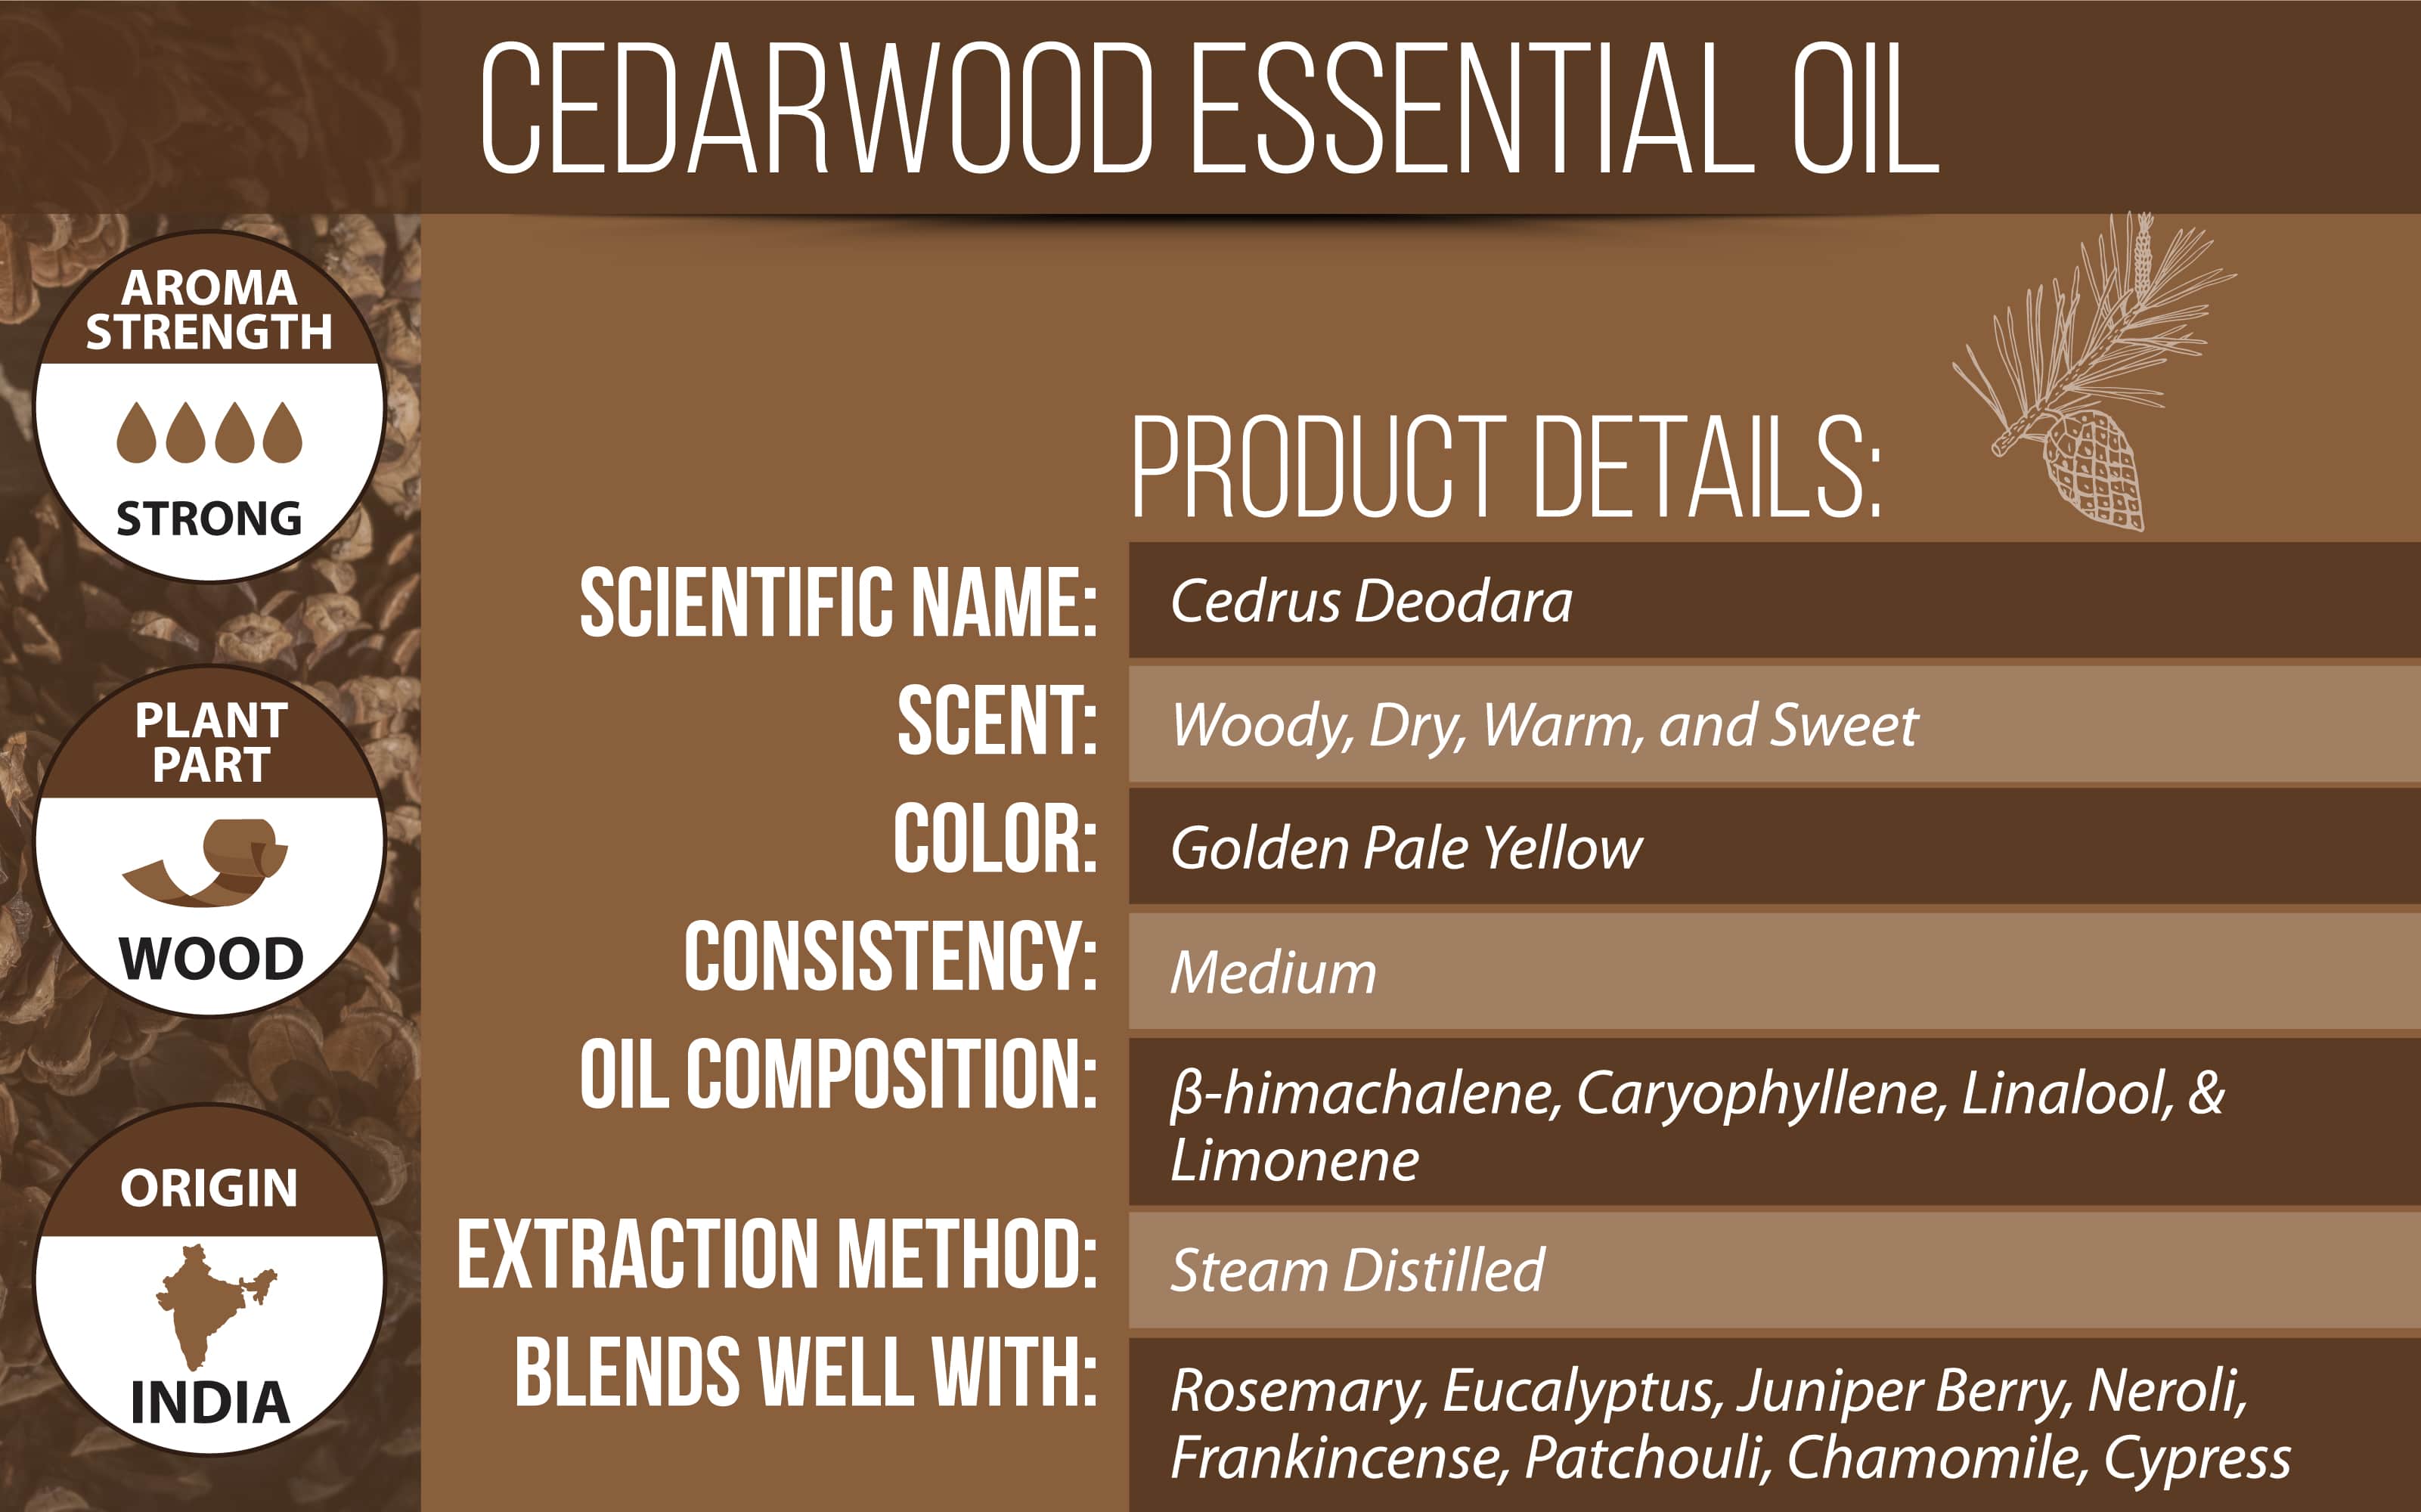 10 Benefits and Uses of Cedarwood Oil